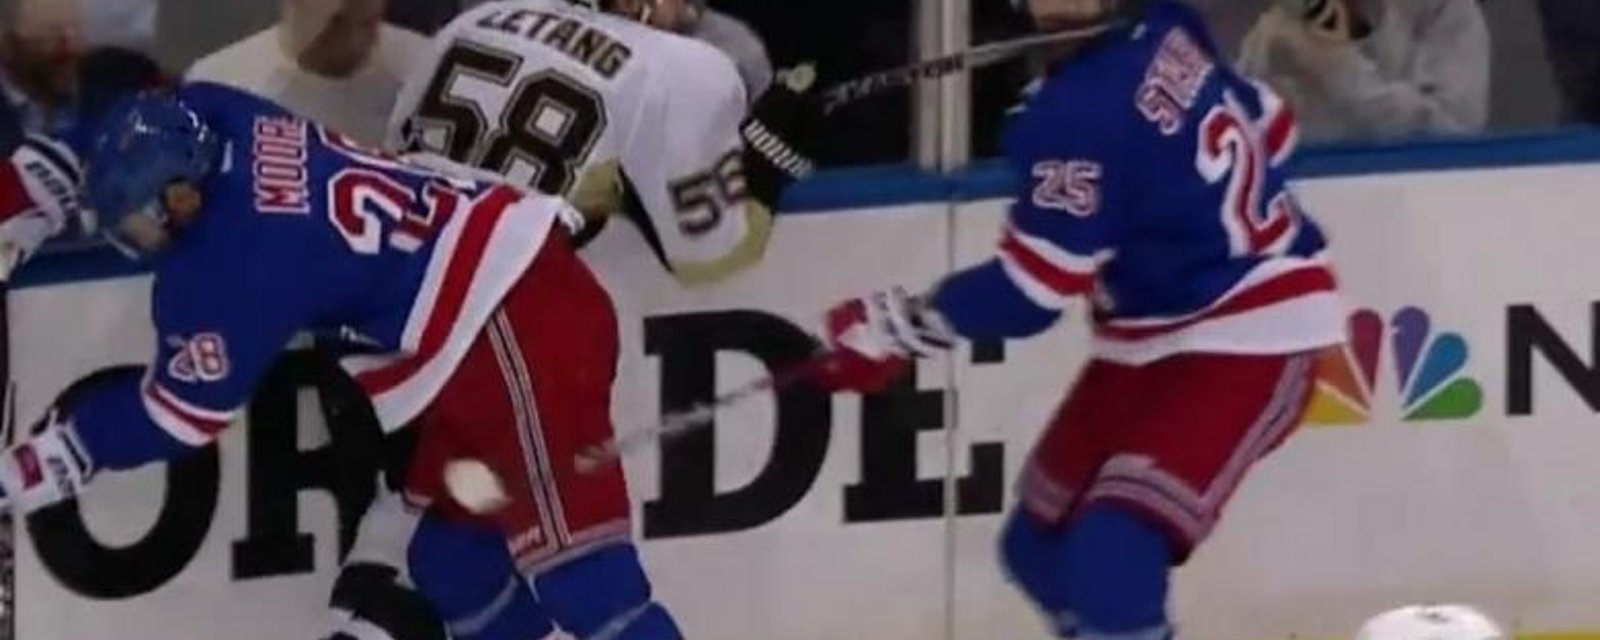 Kris Letang will not face discipline for a vicious slash to the face of his opponent.